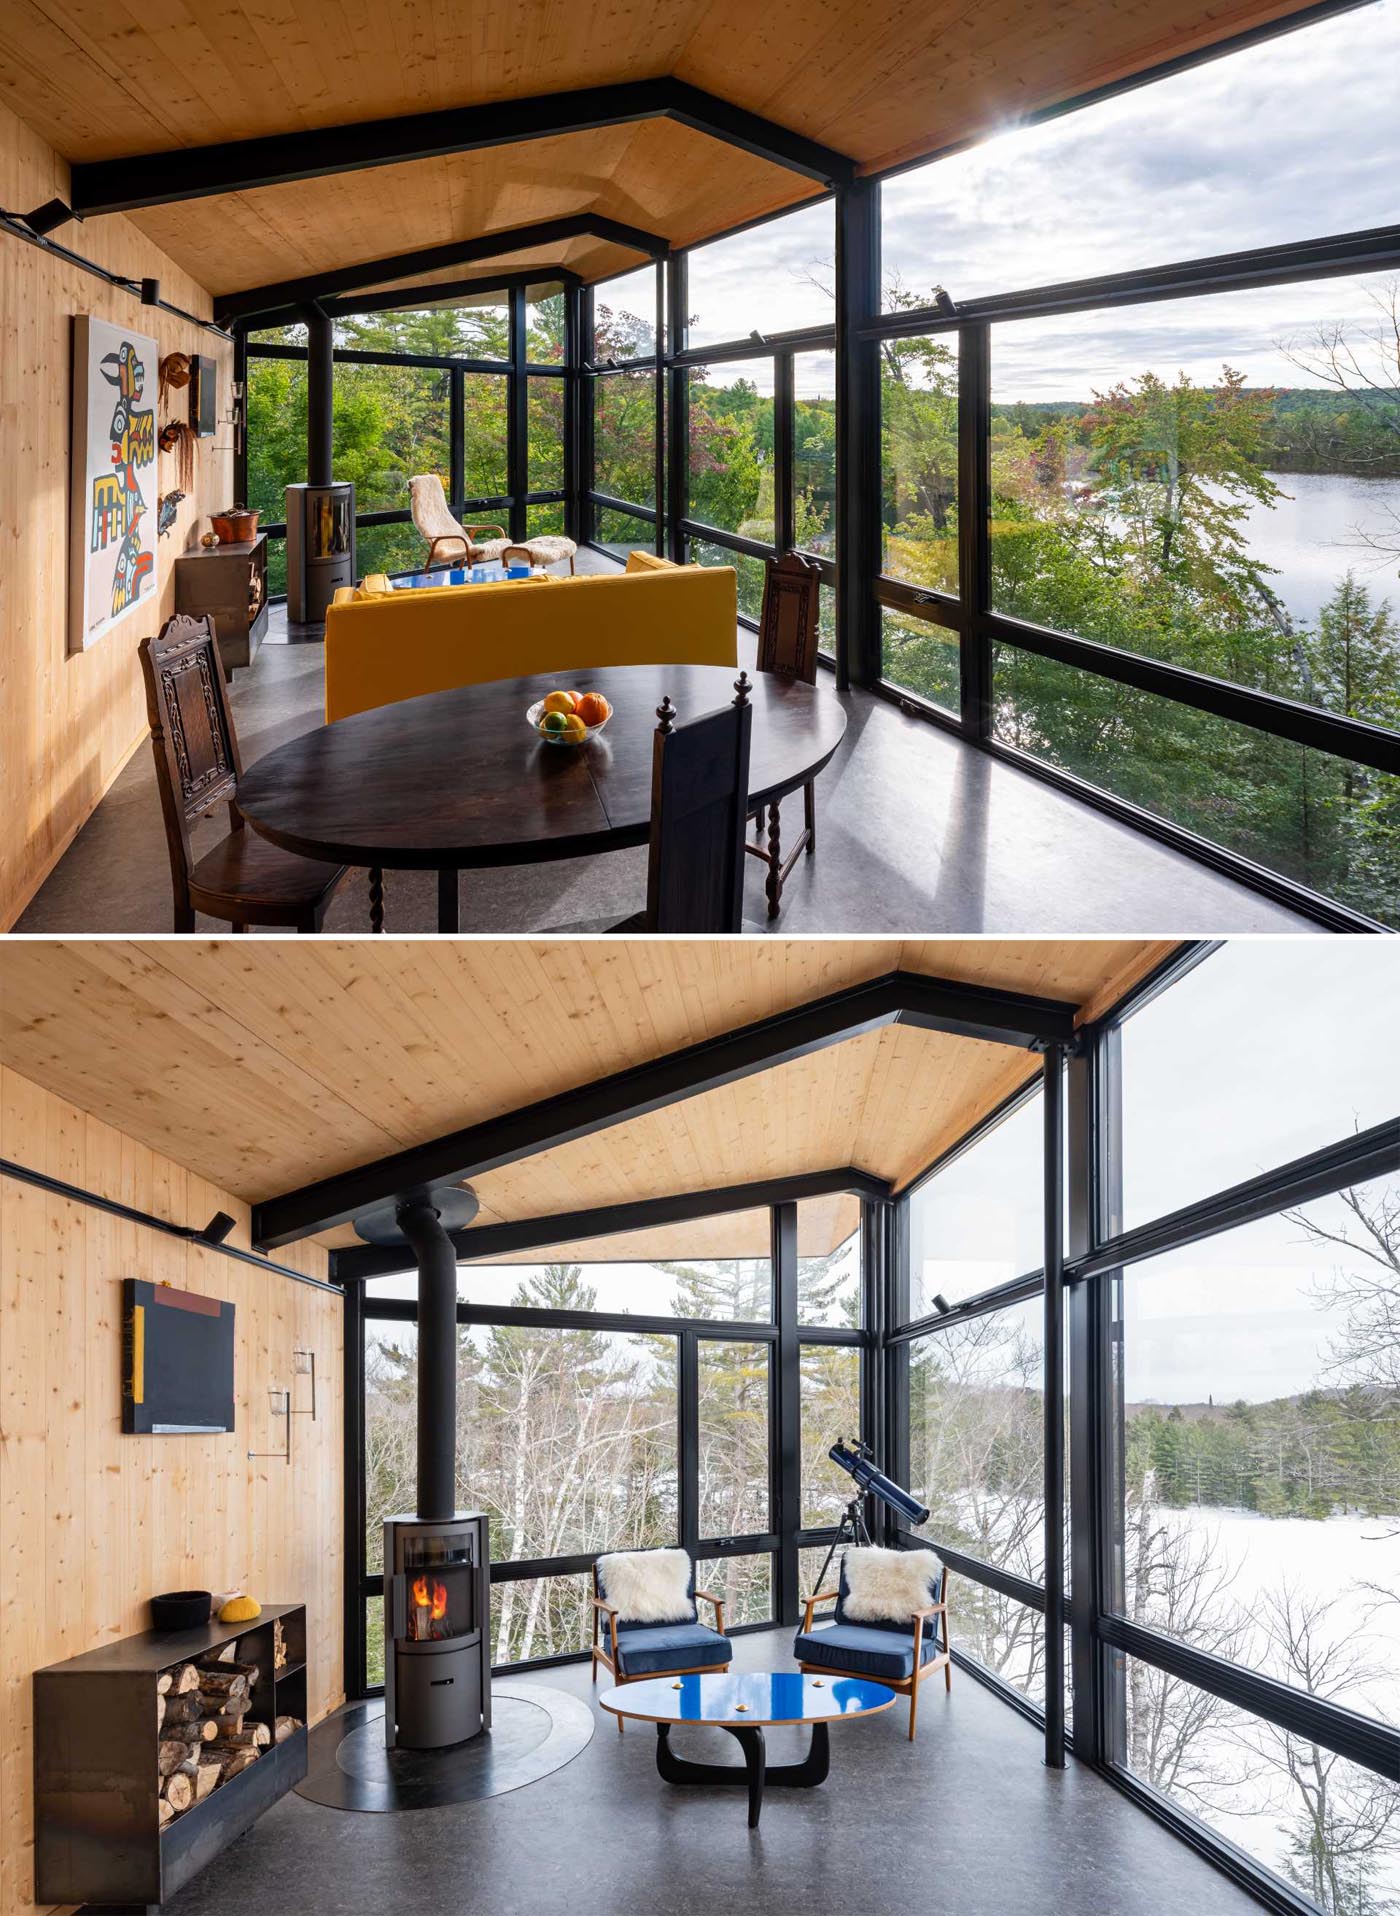 This modern cabin is solar-powered, and heat is provided by a high-efficiency “green carbon” wood stove that can be found in the living room.